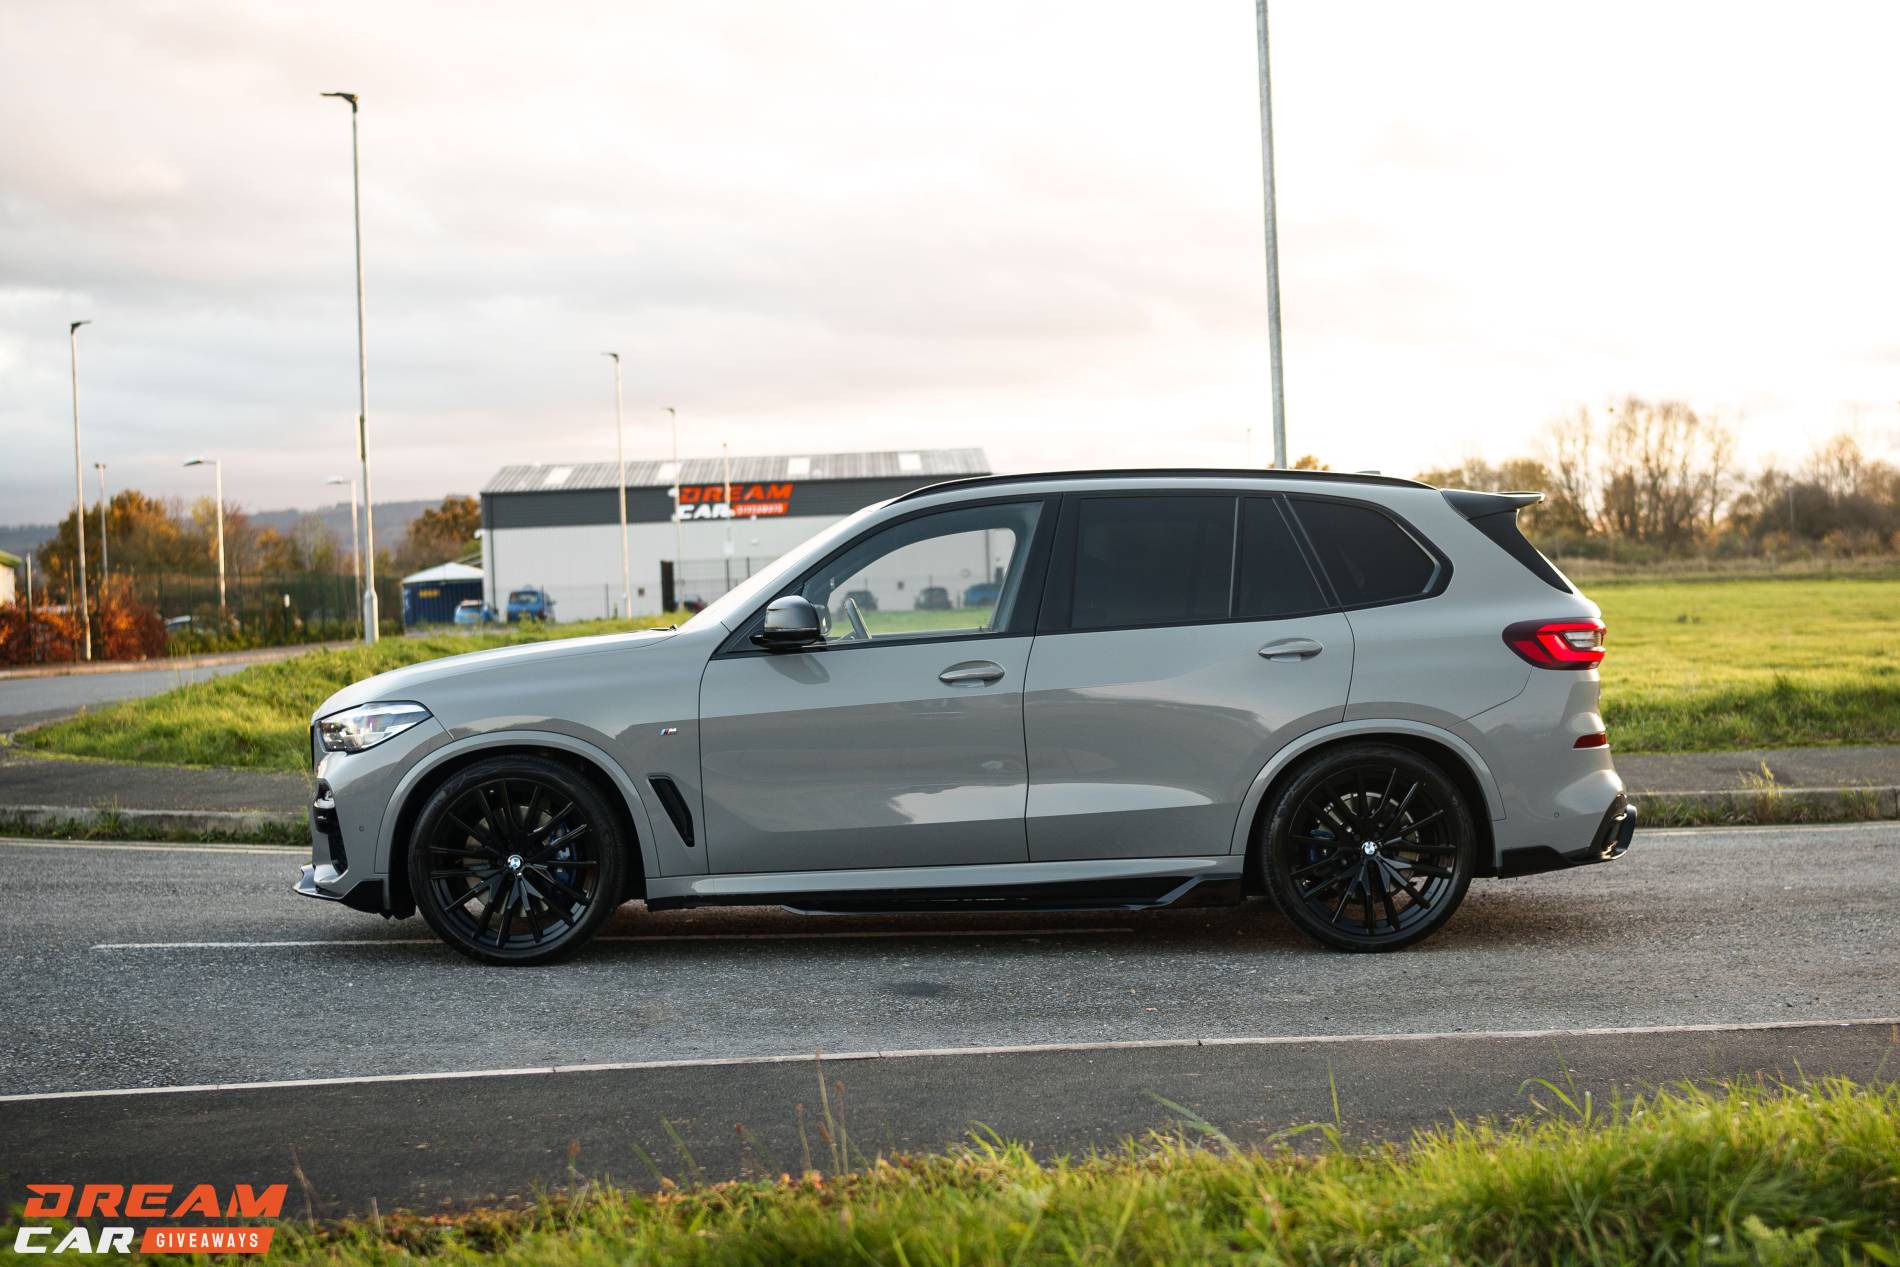 Win this 2021 BMW X5 40D & £2,000 or £45,000 Tax Free